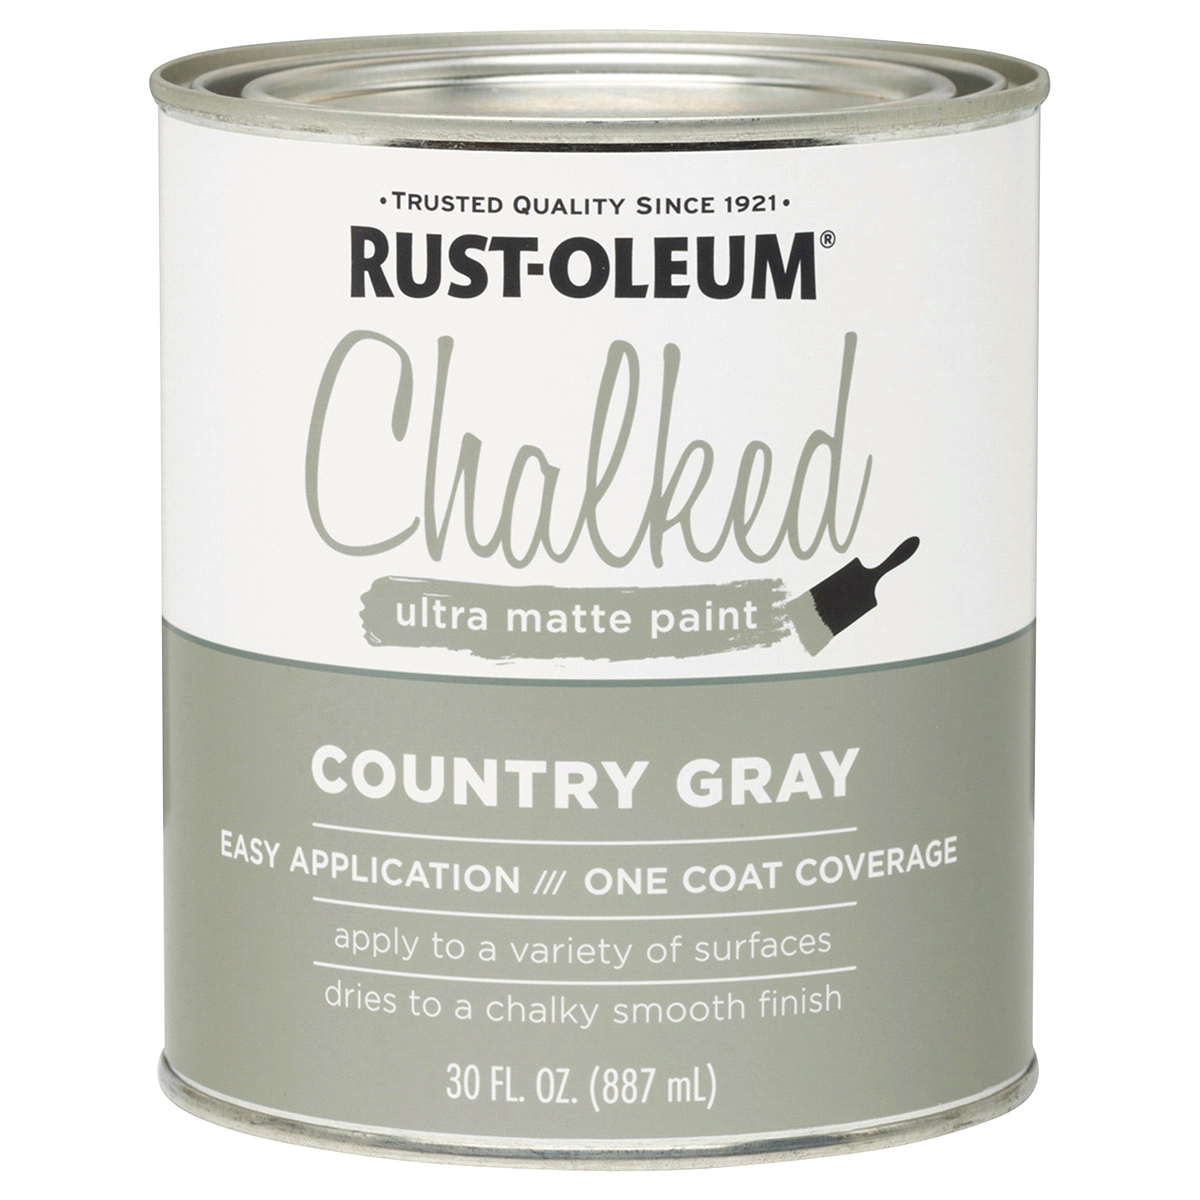 slide 1 of 1, Rust-Oleum Chalked Ultra Matte Paint - 285141, Quart, Country Gray, 1 ct